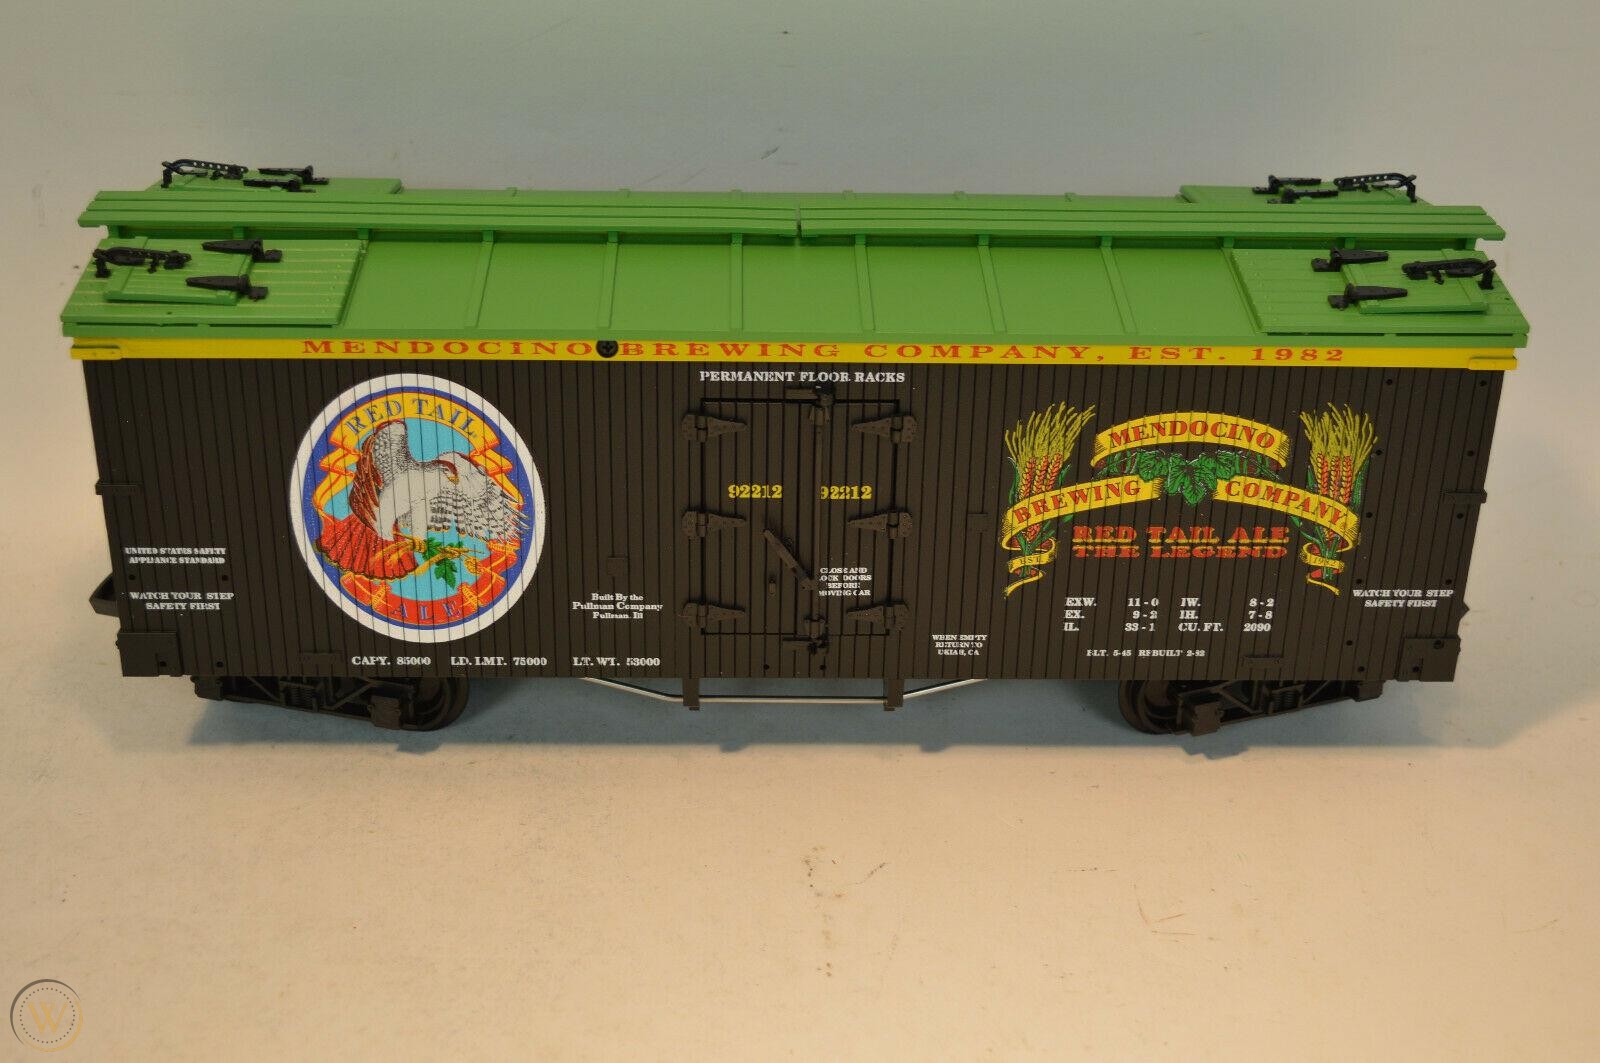 USA Trains TS16008 Mendocino Brewing Company Red Tail Ale Refrigerator Car Ln/bx for sale online 